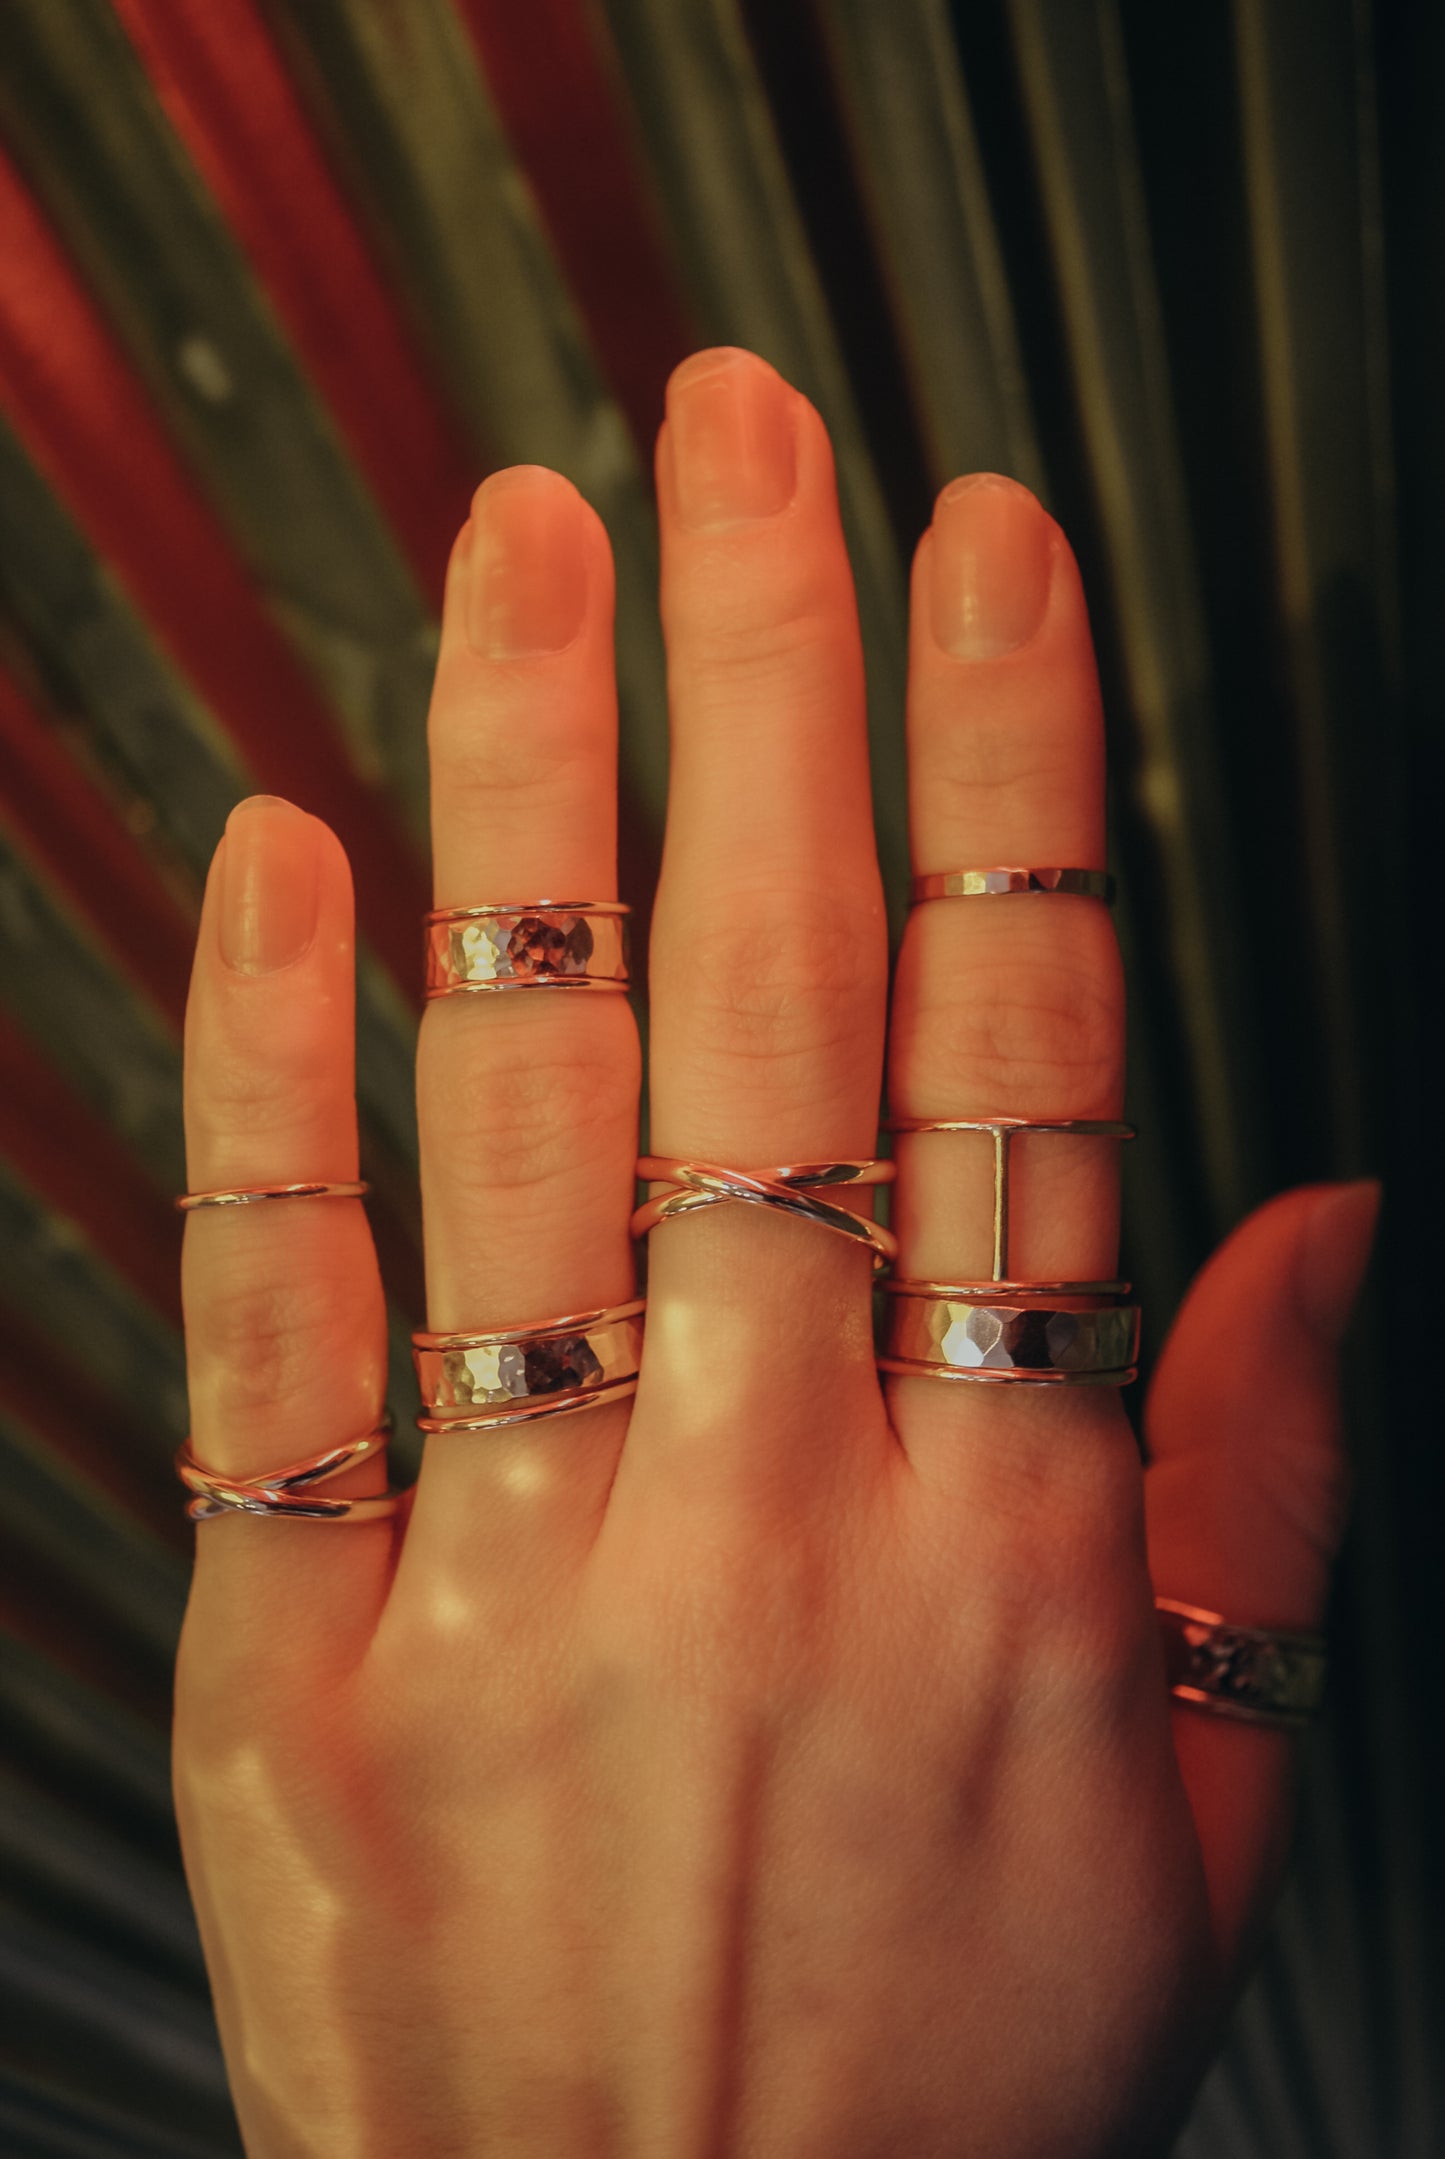 STACKING RING SET OF 3 SHOWN ON DIFFERENT FINGERS WITH SOME OF OUR OTHER PIECES! - HAMMERED THICK 5MM BAND WITH TWO SMALLER 1MM SMOOTH BANDS - GOLD FILL - STERLING SILVER - ROSE GOLD FILL - STACKABLE RINGS - INTERCHANGEABLE - WEDDING STYLE - CAN ALSO ACT AS A SPINNER RING!